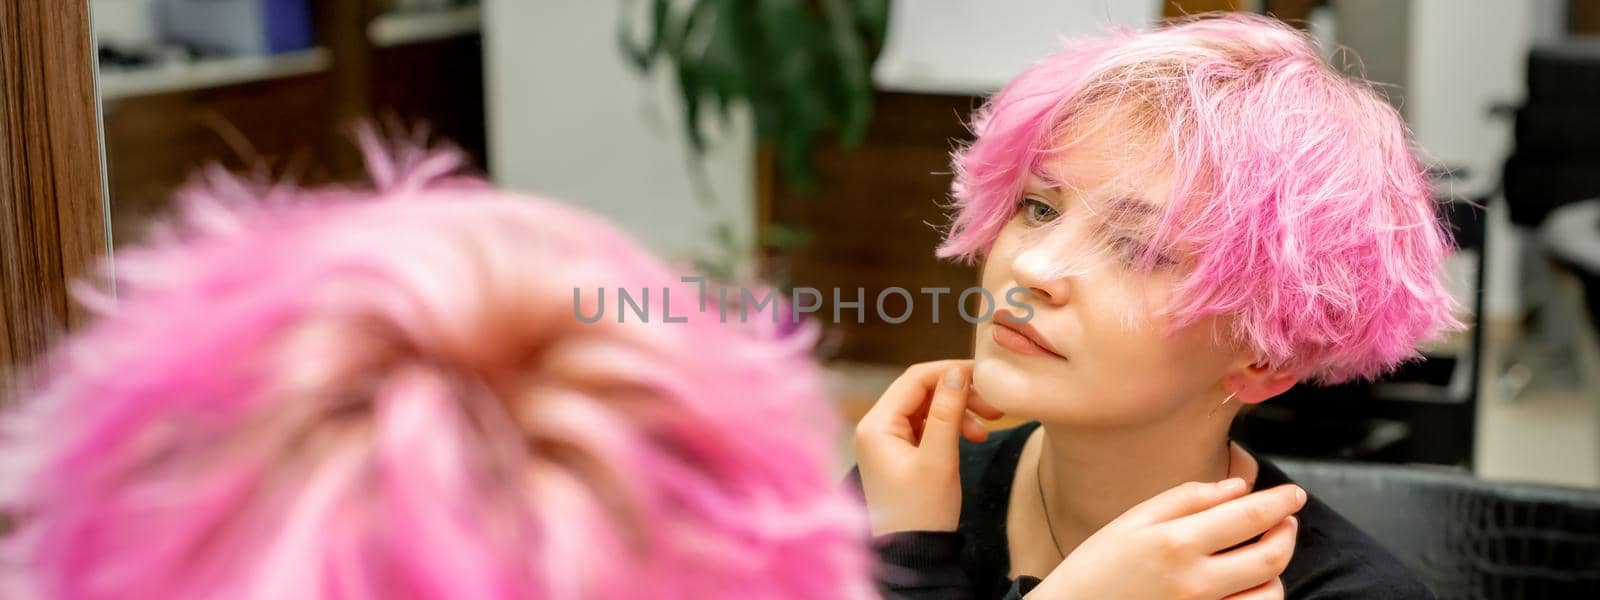 The beautiful young caucasian woman with a new short pink hairstyle looking at her reflection in the mirror checking hairstyle in a hairdresser salon